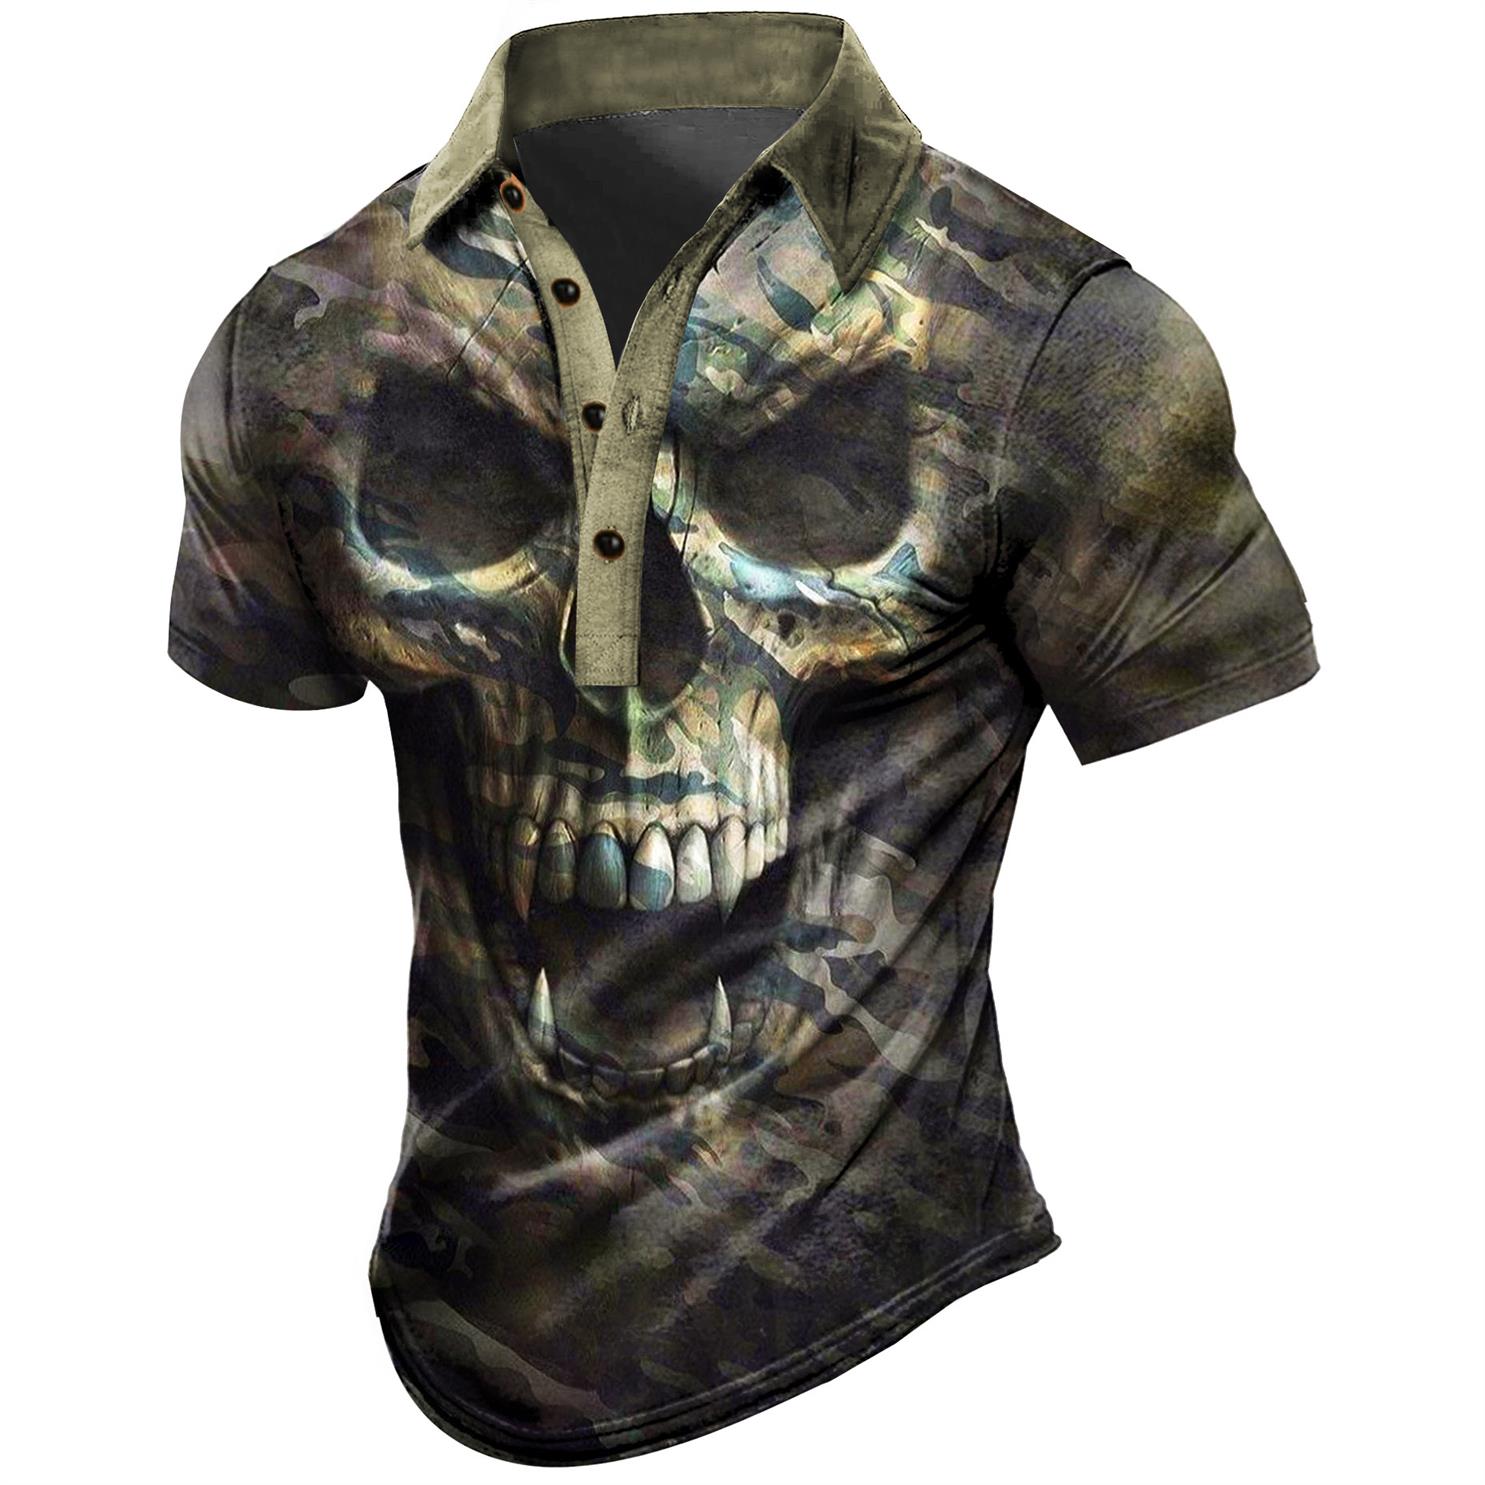 Men's Vintage Camouflage Skull Print Chic Polo T-shirt